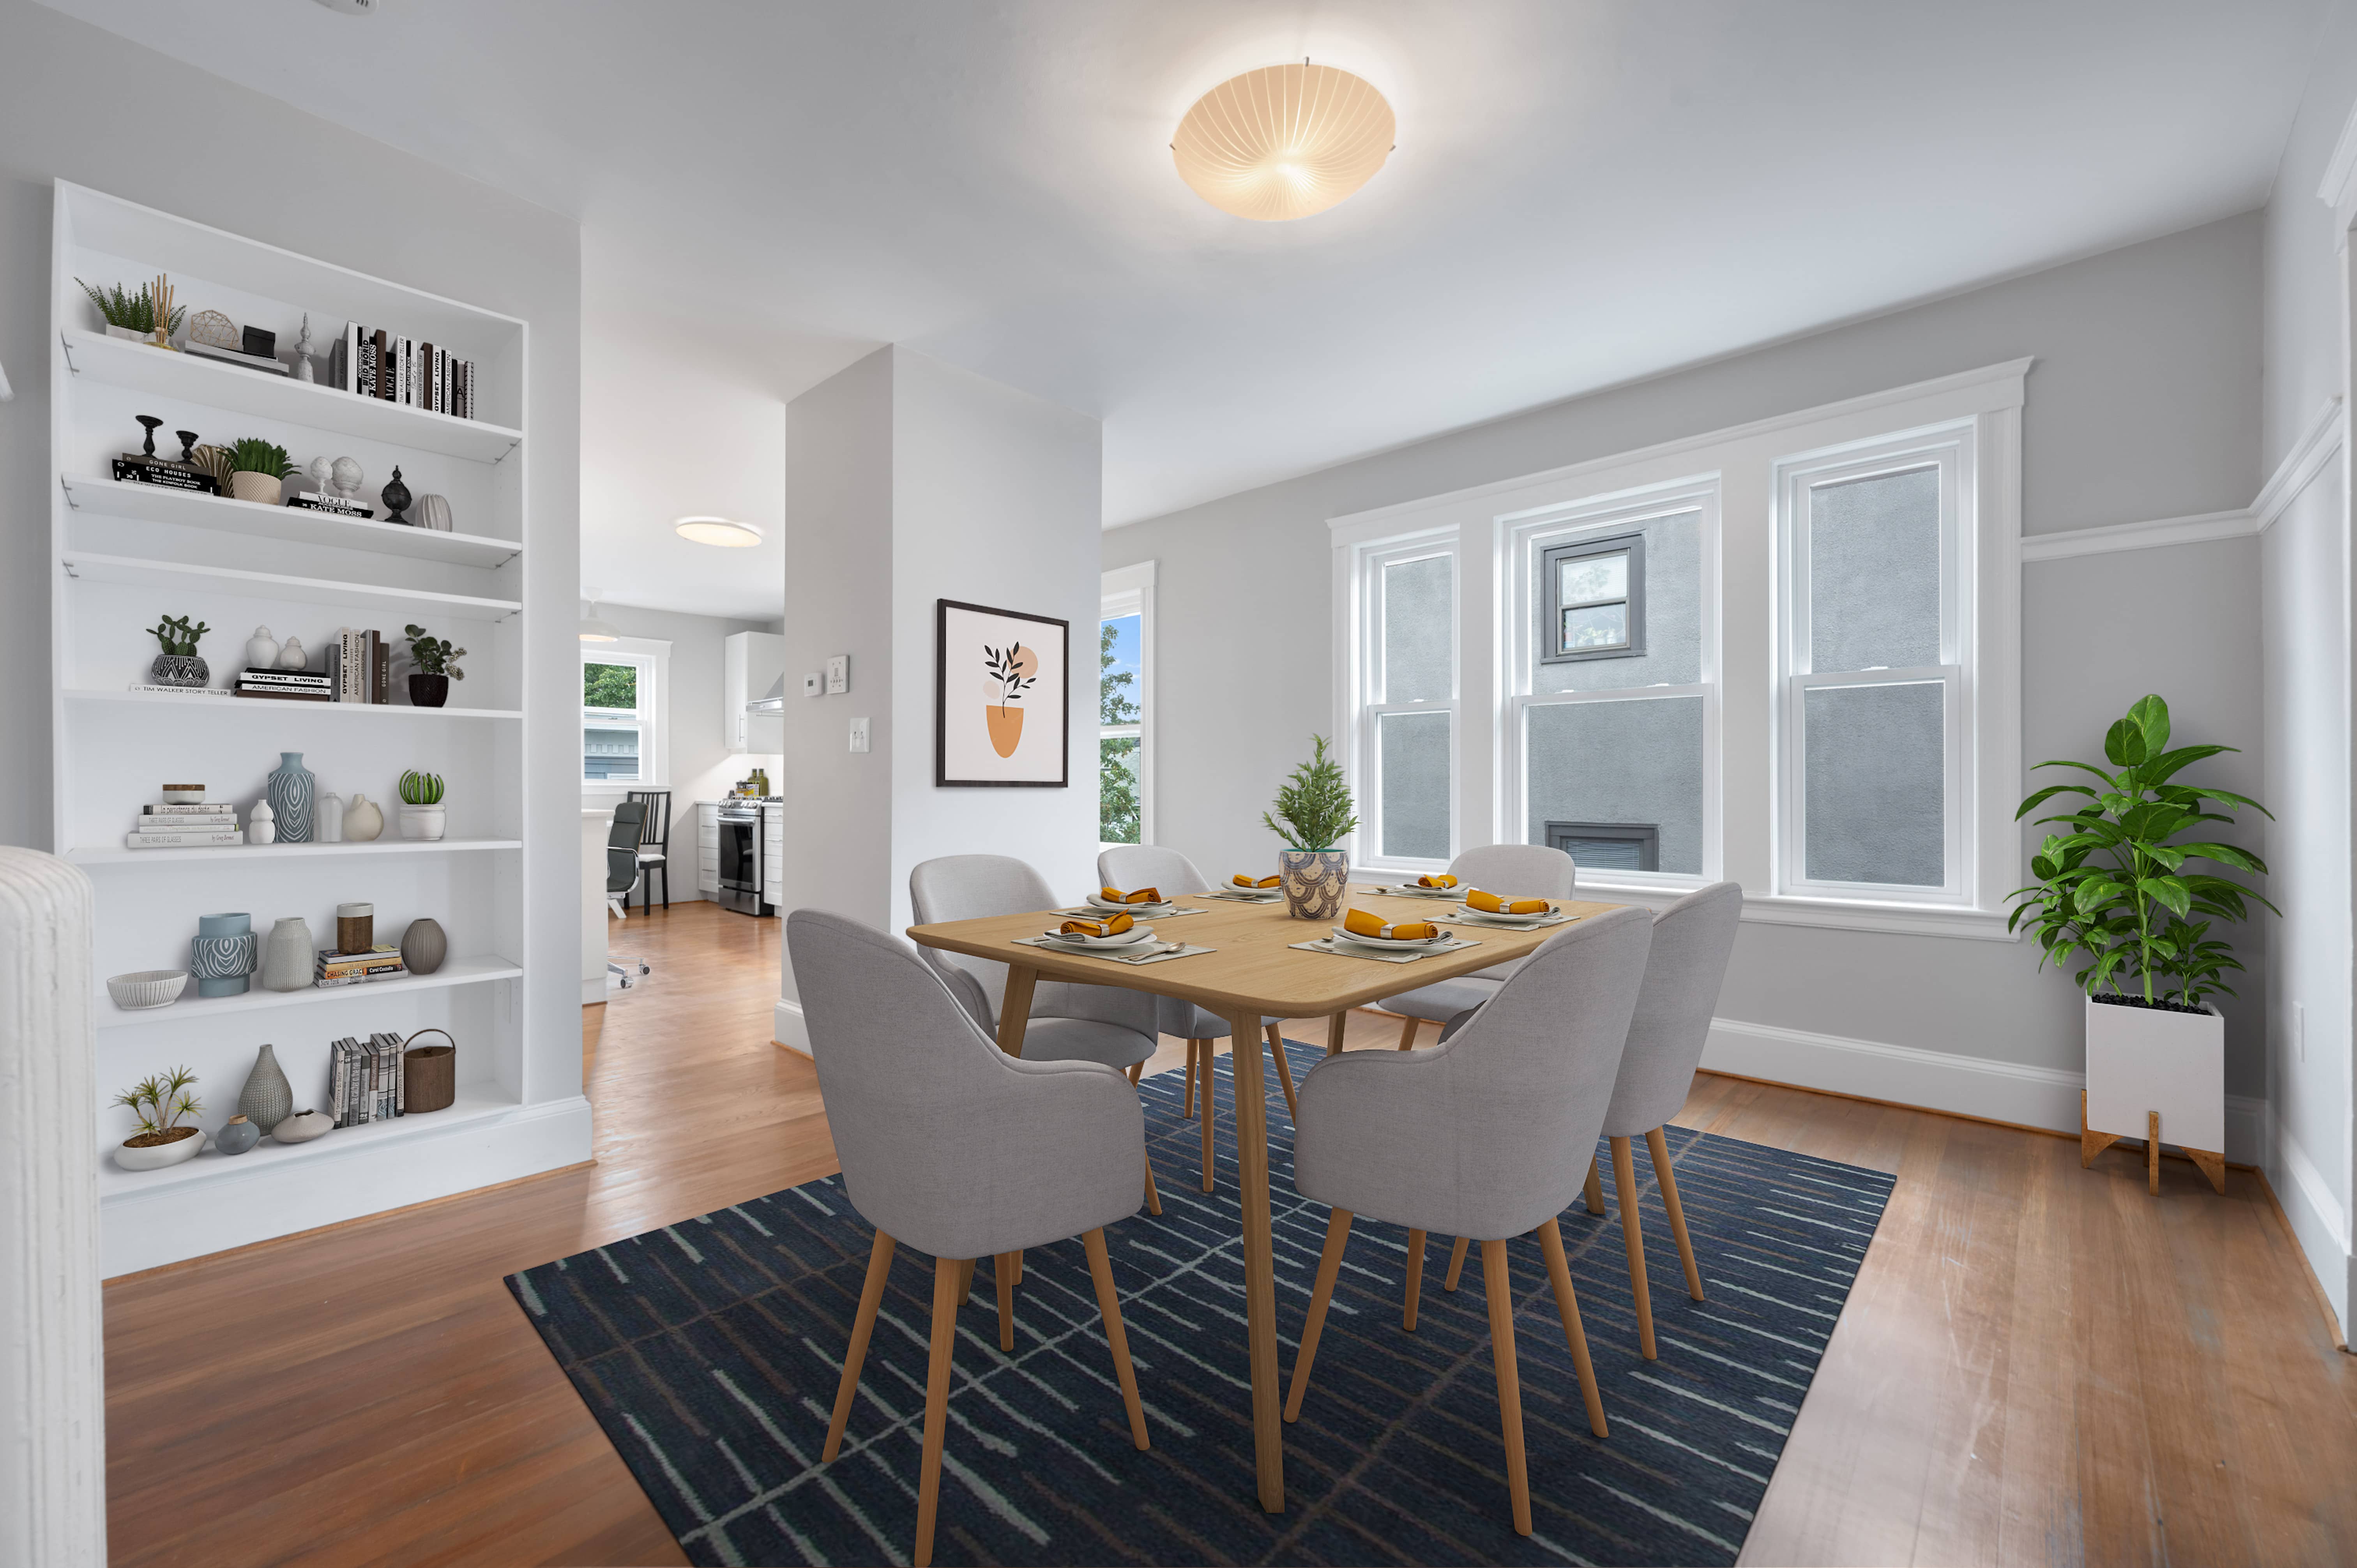 See what's now For Sale in Somerville